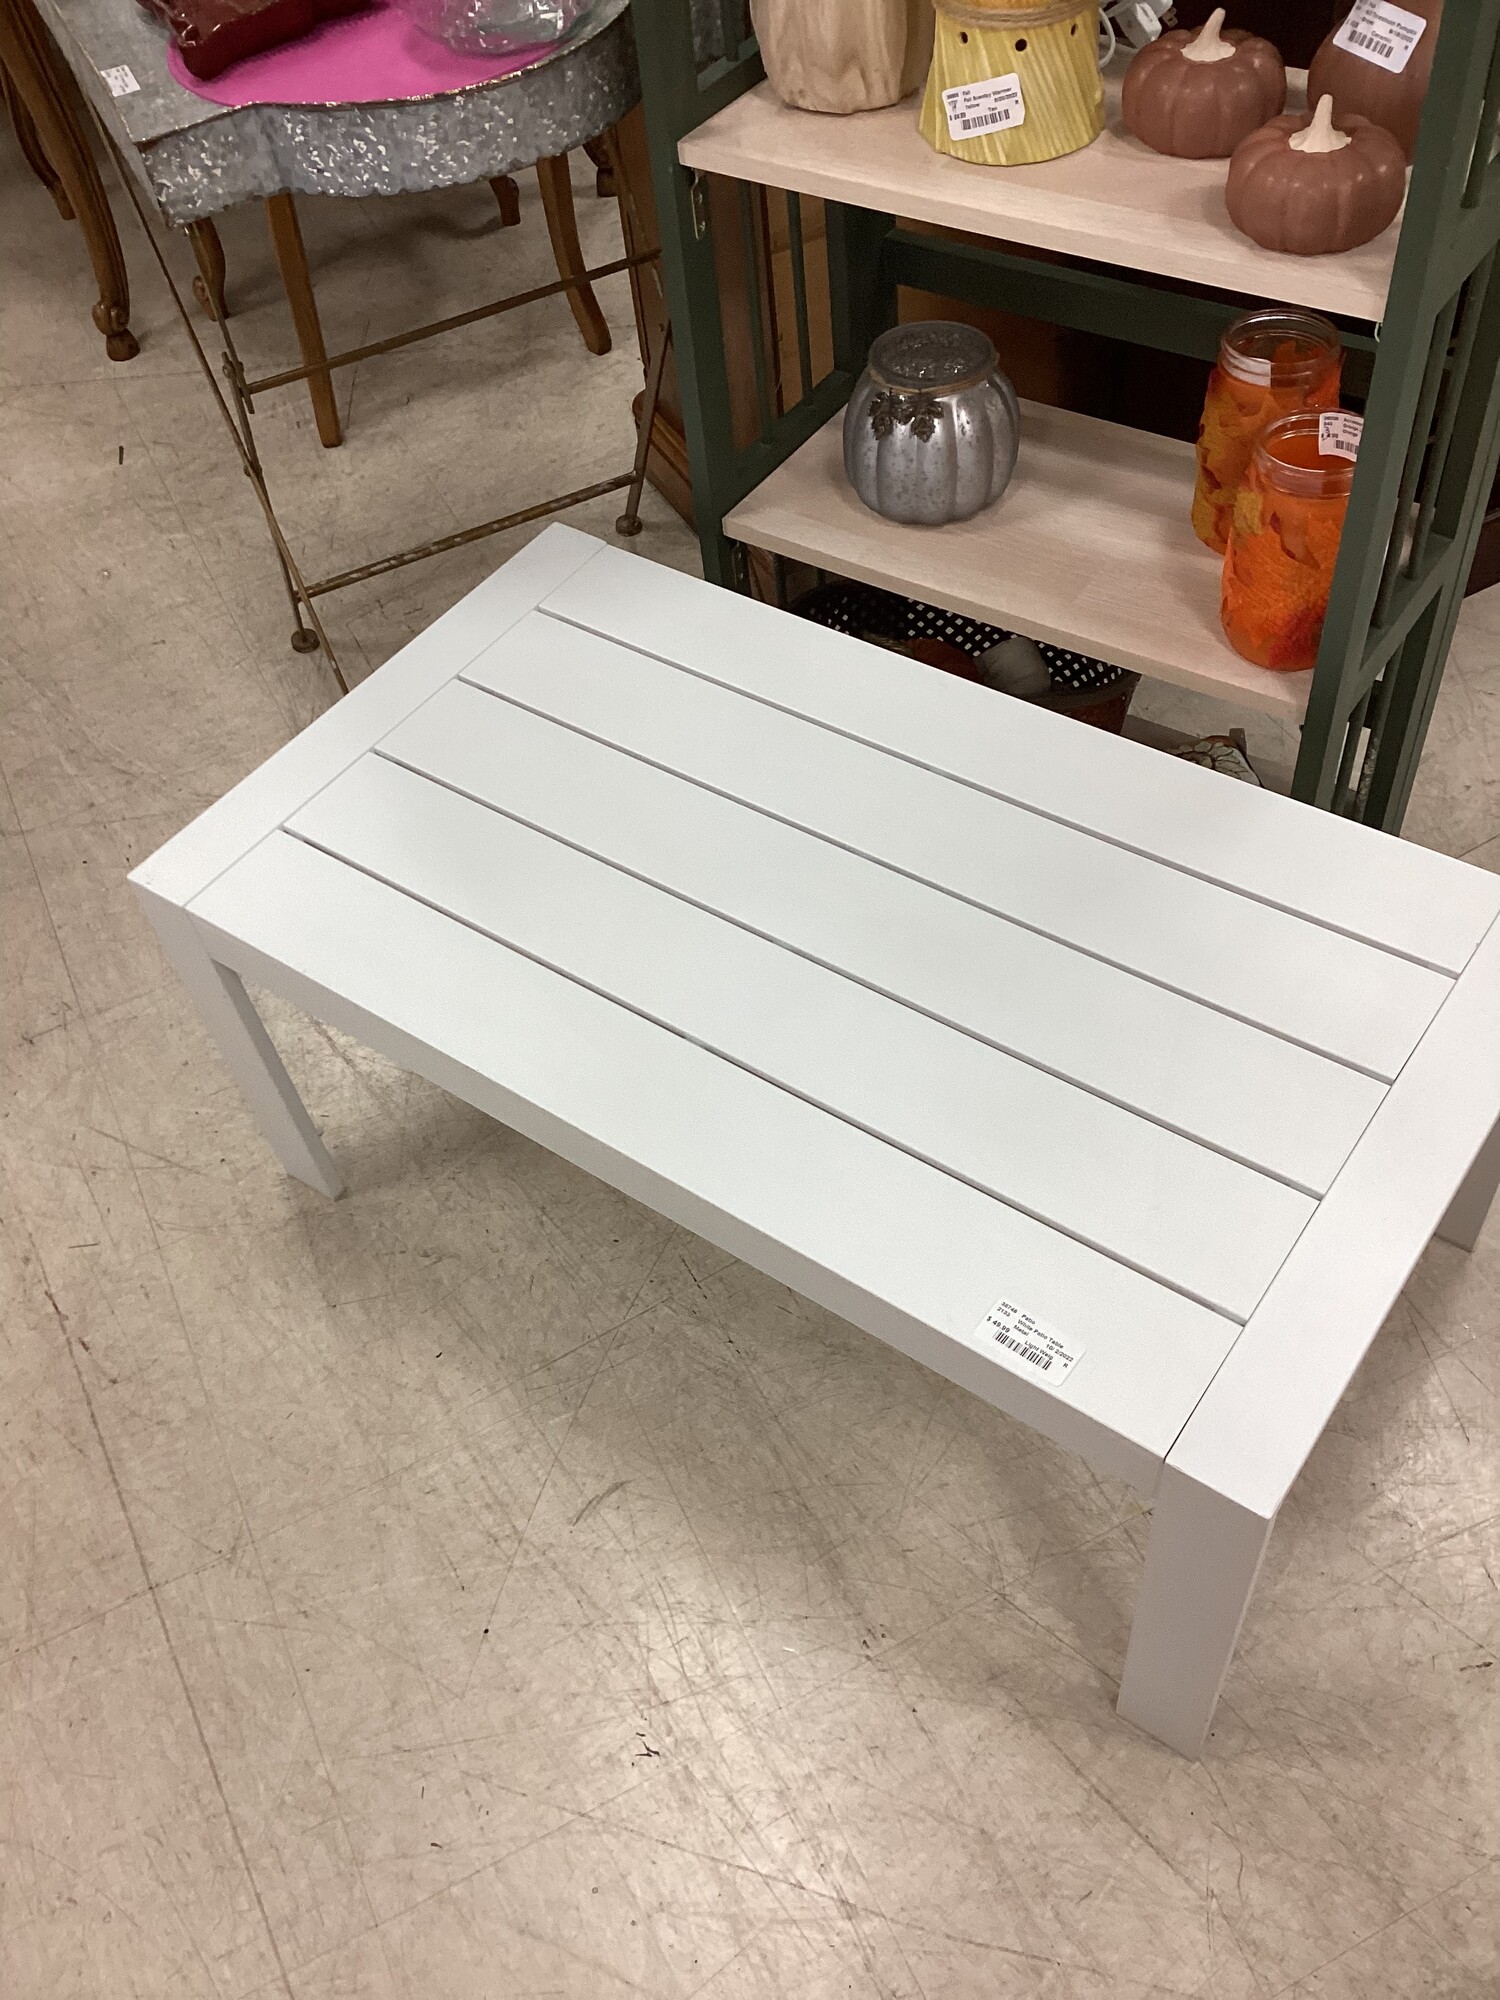 White Patio Table, Metal, Light Weig
35.5 In W x 20 In D x 15 In T